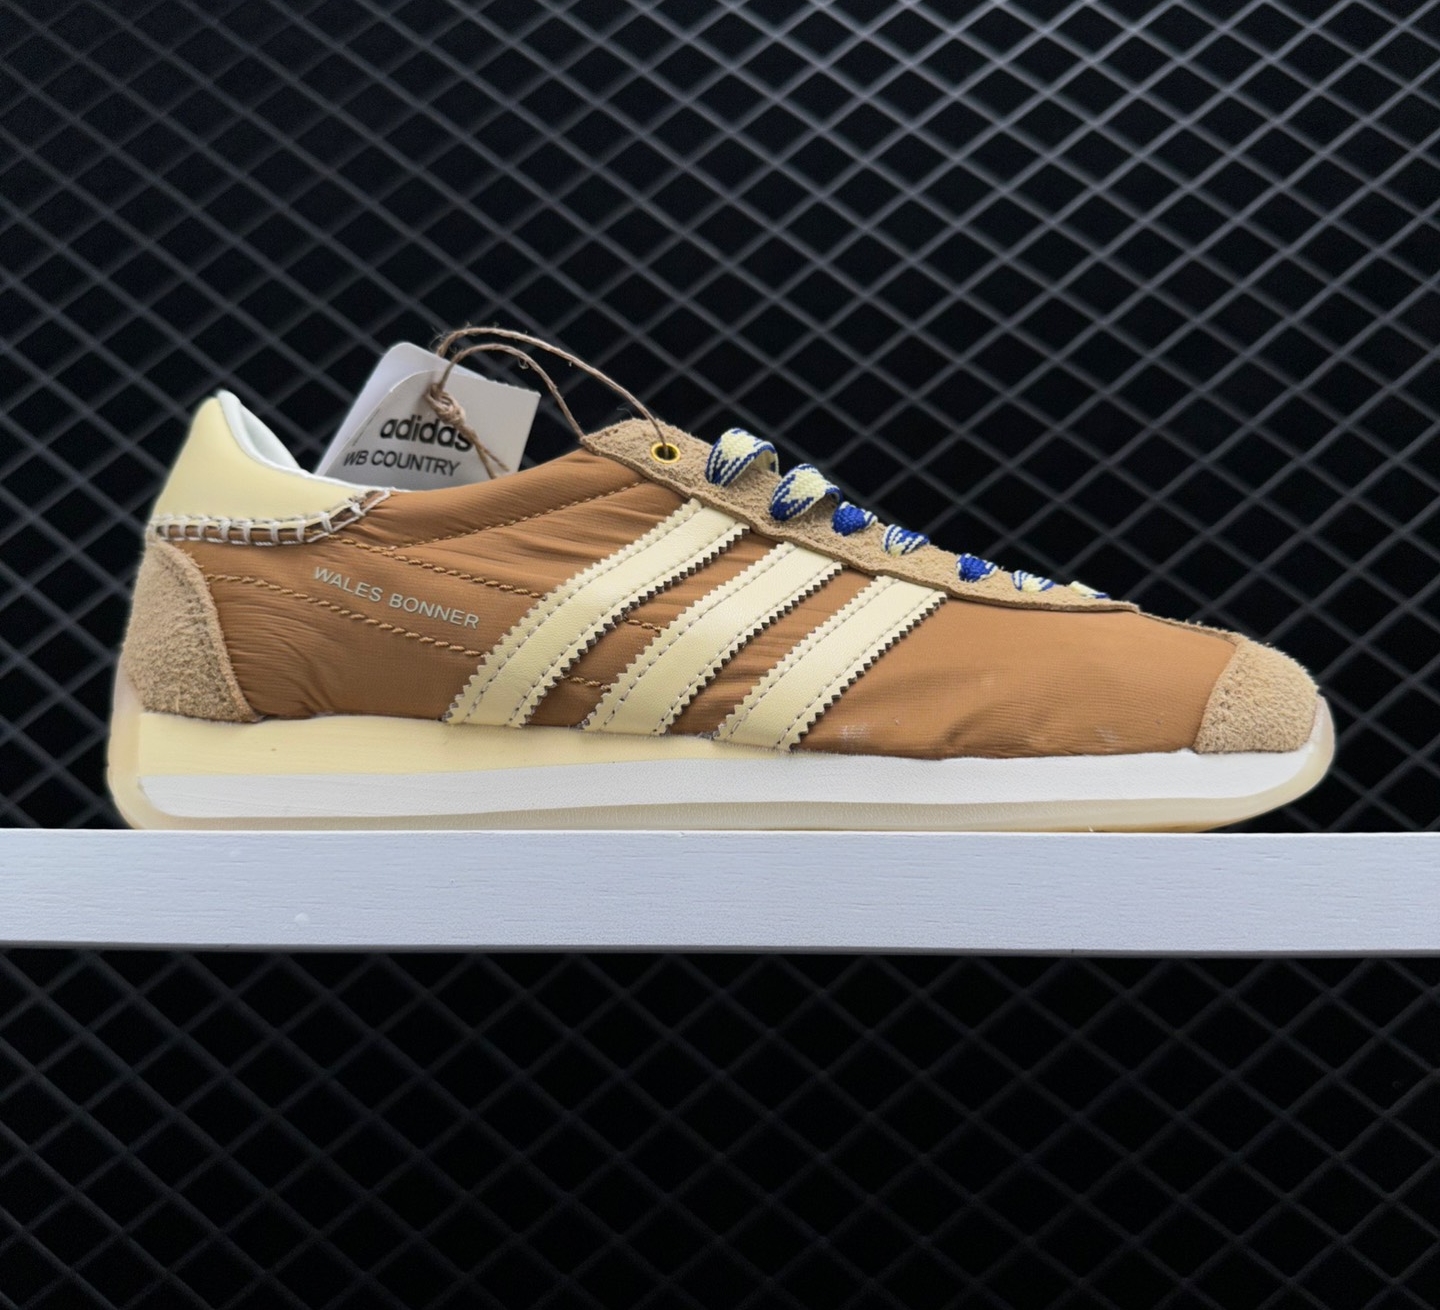 Adidas Wales Bonner x Country 'Mesa Easy Yellow' GW1388 - Shop the Stylish Collaboration